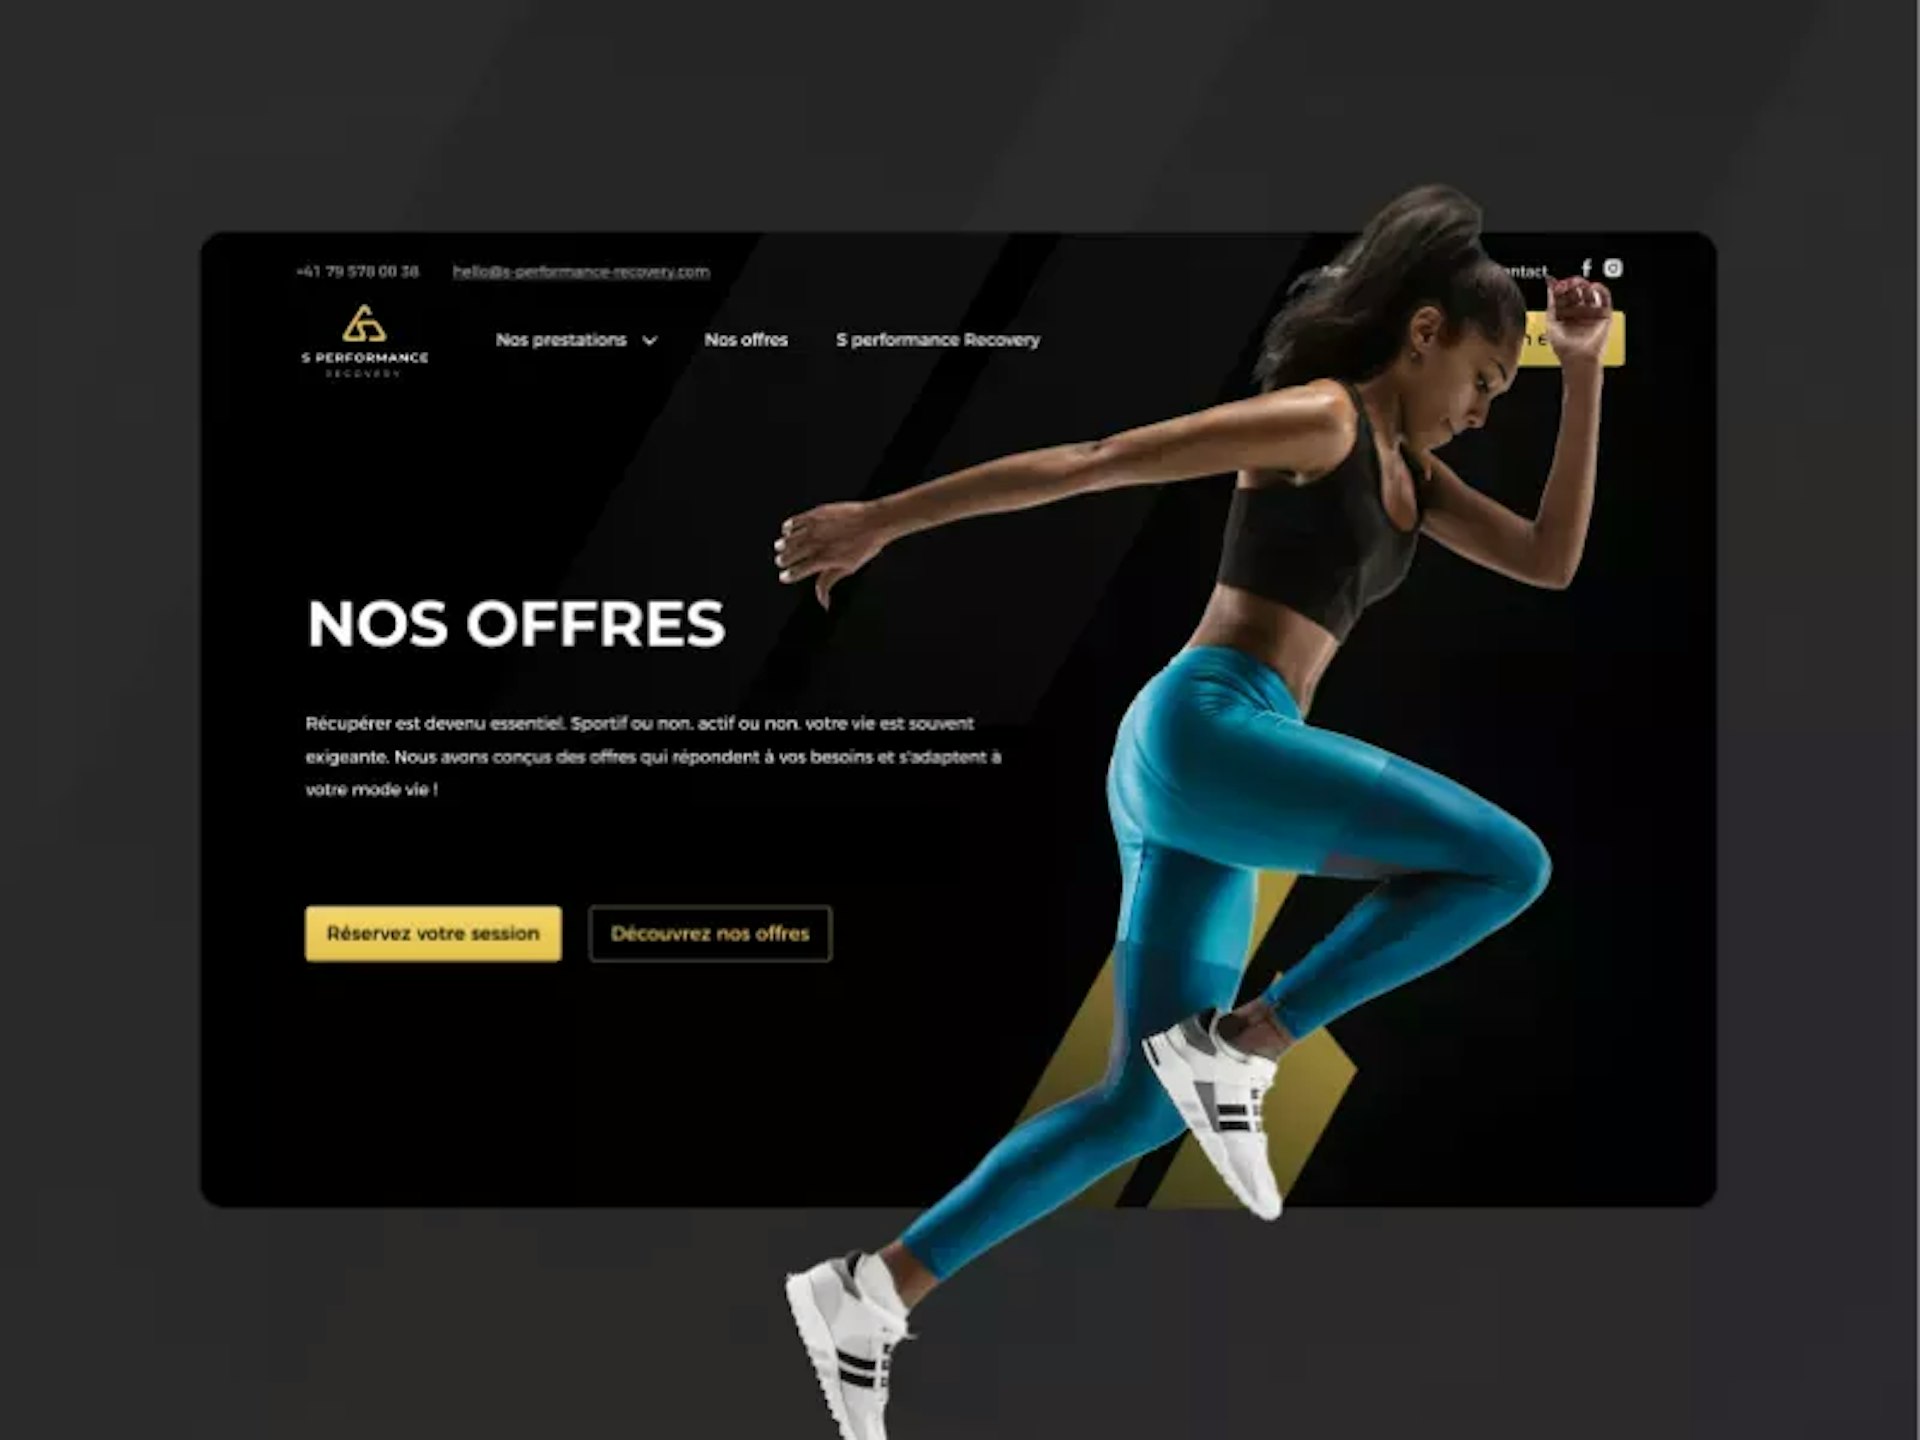 Page Nos Offres de S-Performance Recovery